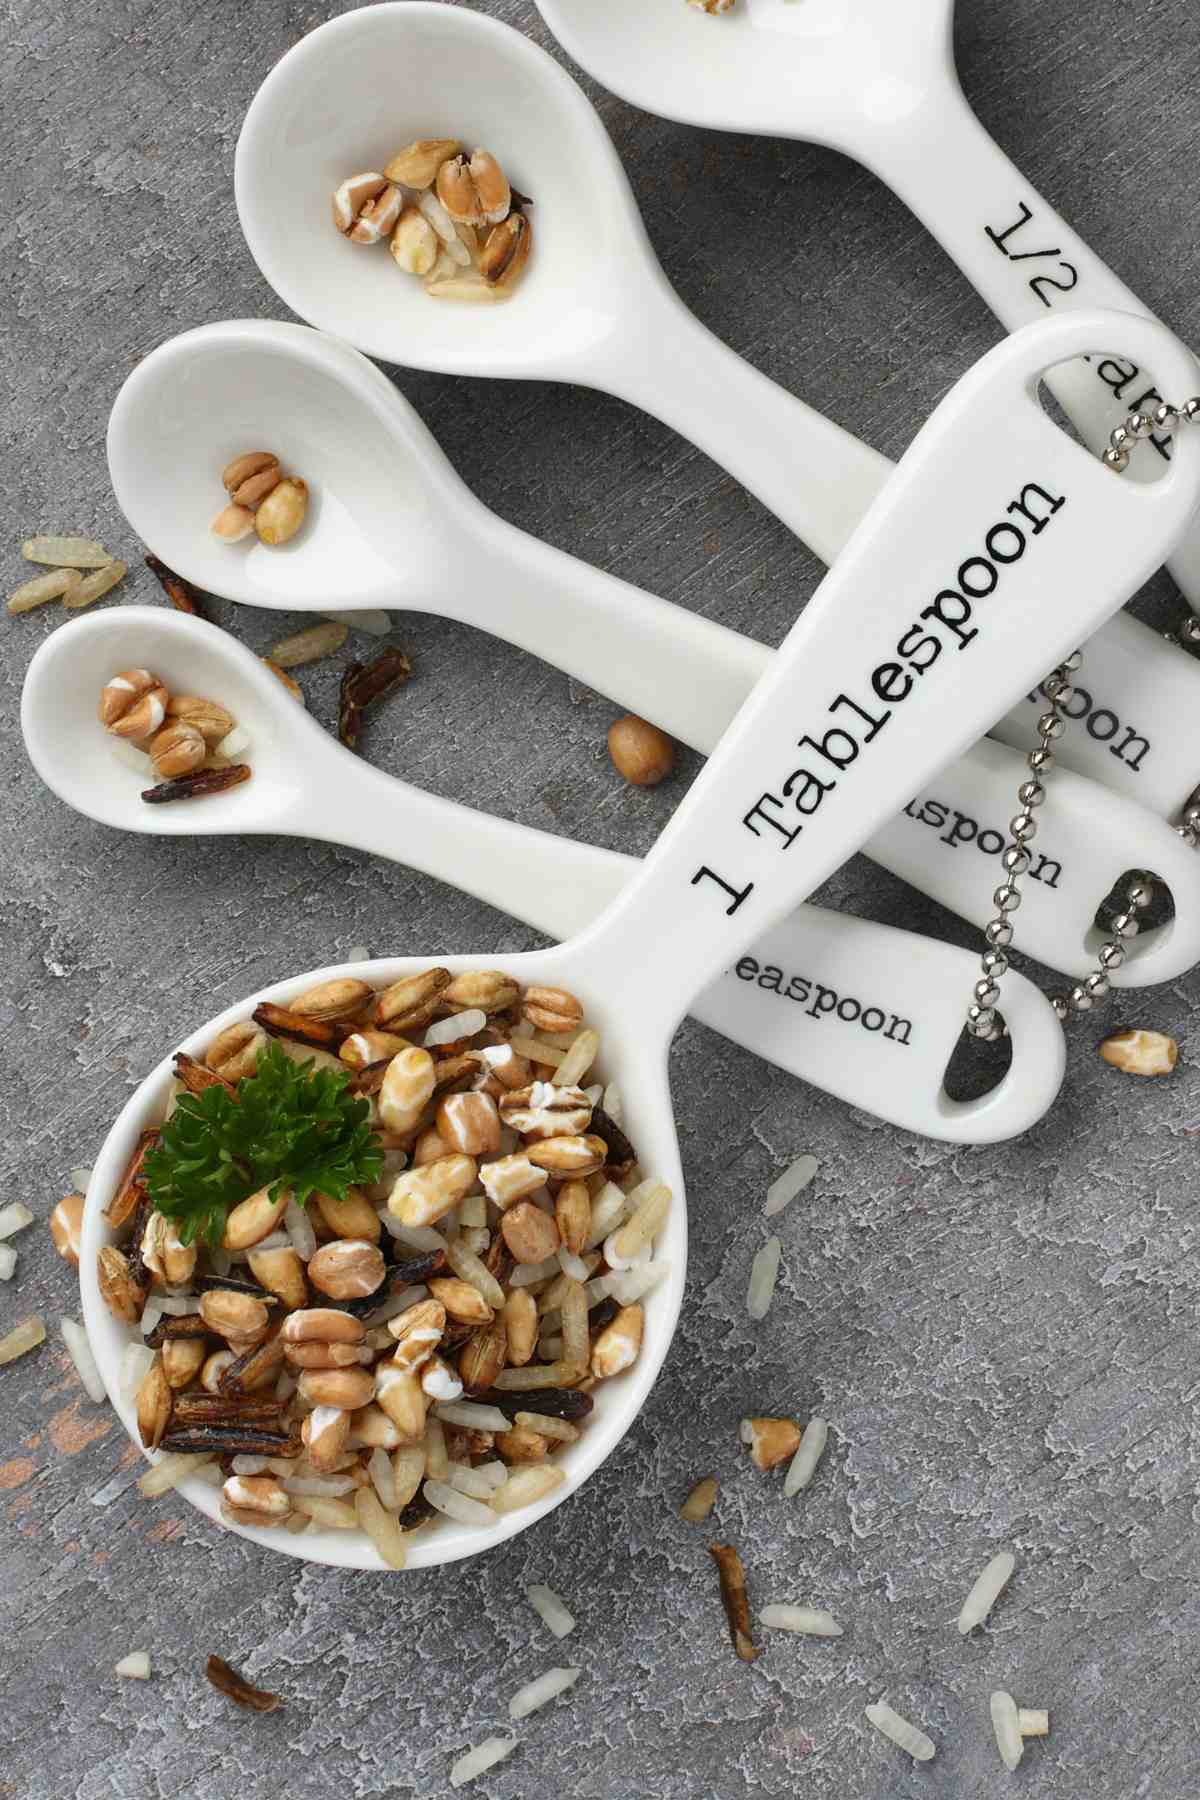 Converting 4 tablespoons to cups seems simple. You may be asking yourself: “4 tablespoons is equal to how many cups” again? We’ve got you covered with tips on how to convert 4 tbsp to cups for every situation!